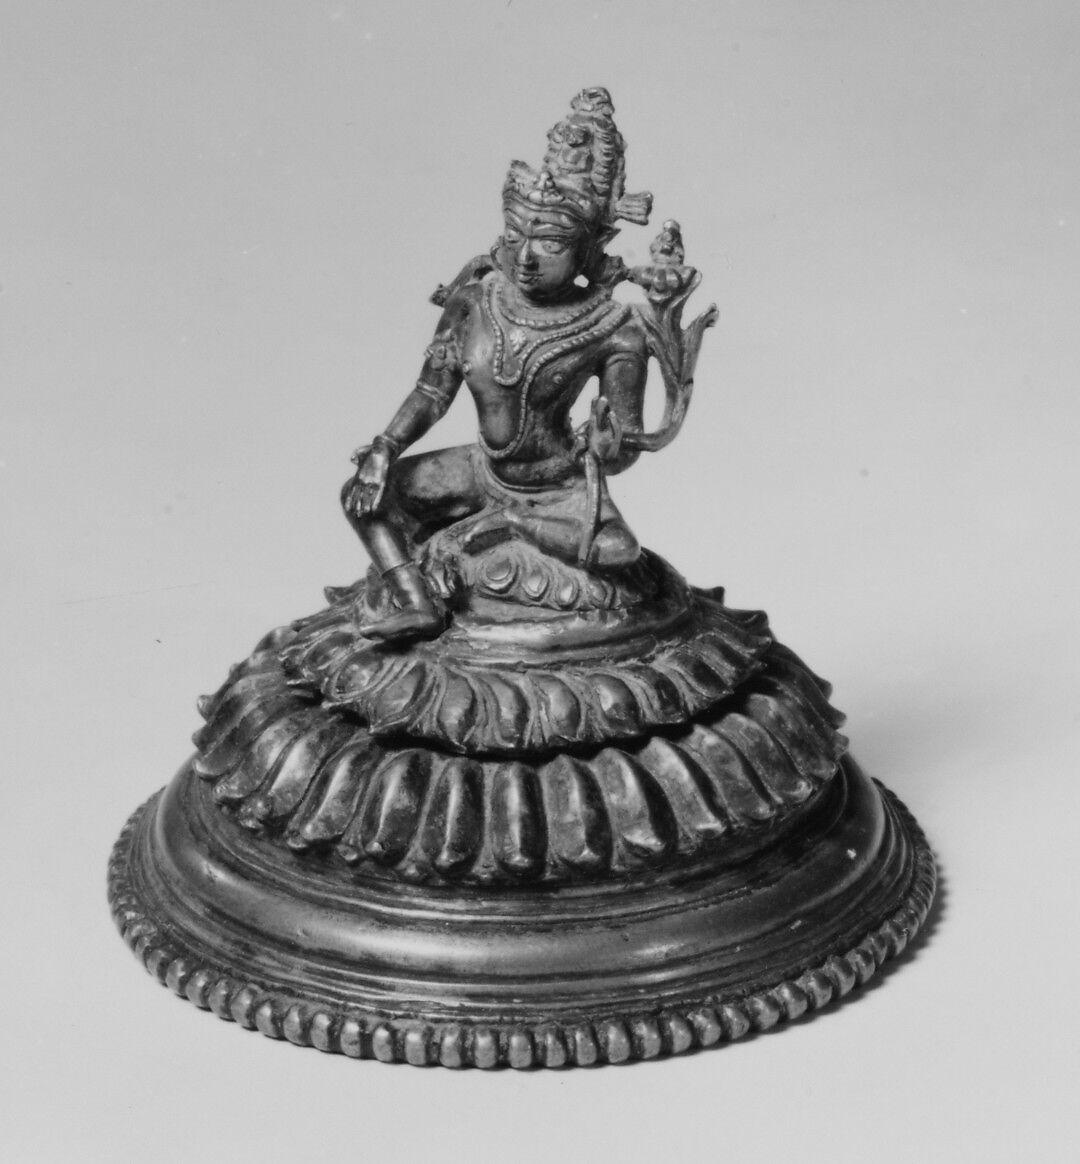 Seated Padmapani, the Lotus-Bearing Bodhisattva, Bronze with silver and copper inlay, India (Bengal) or Bangladesh 